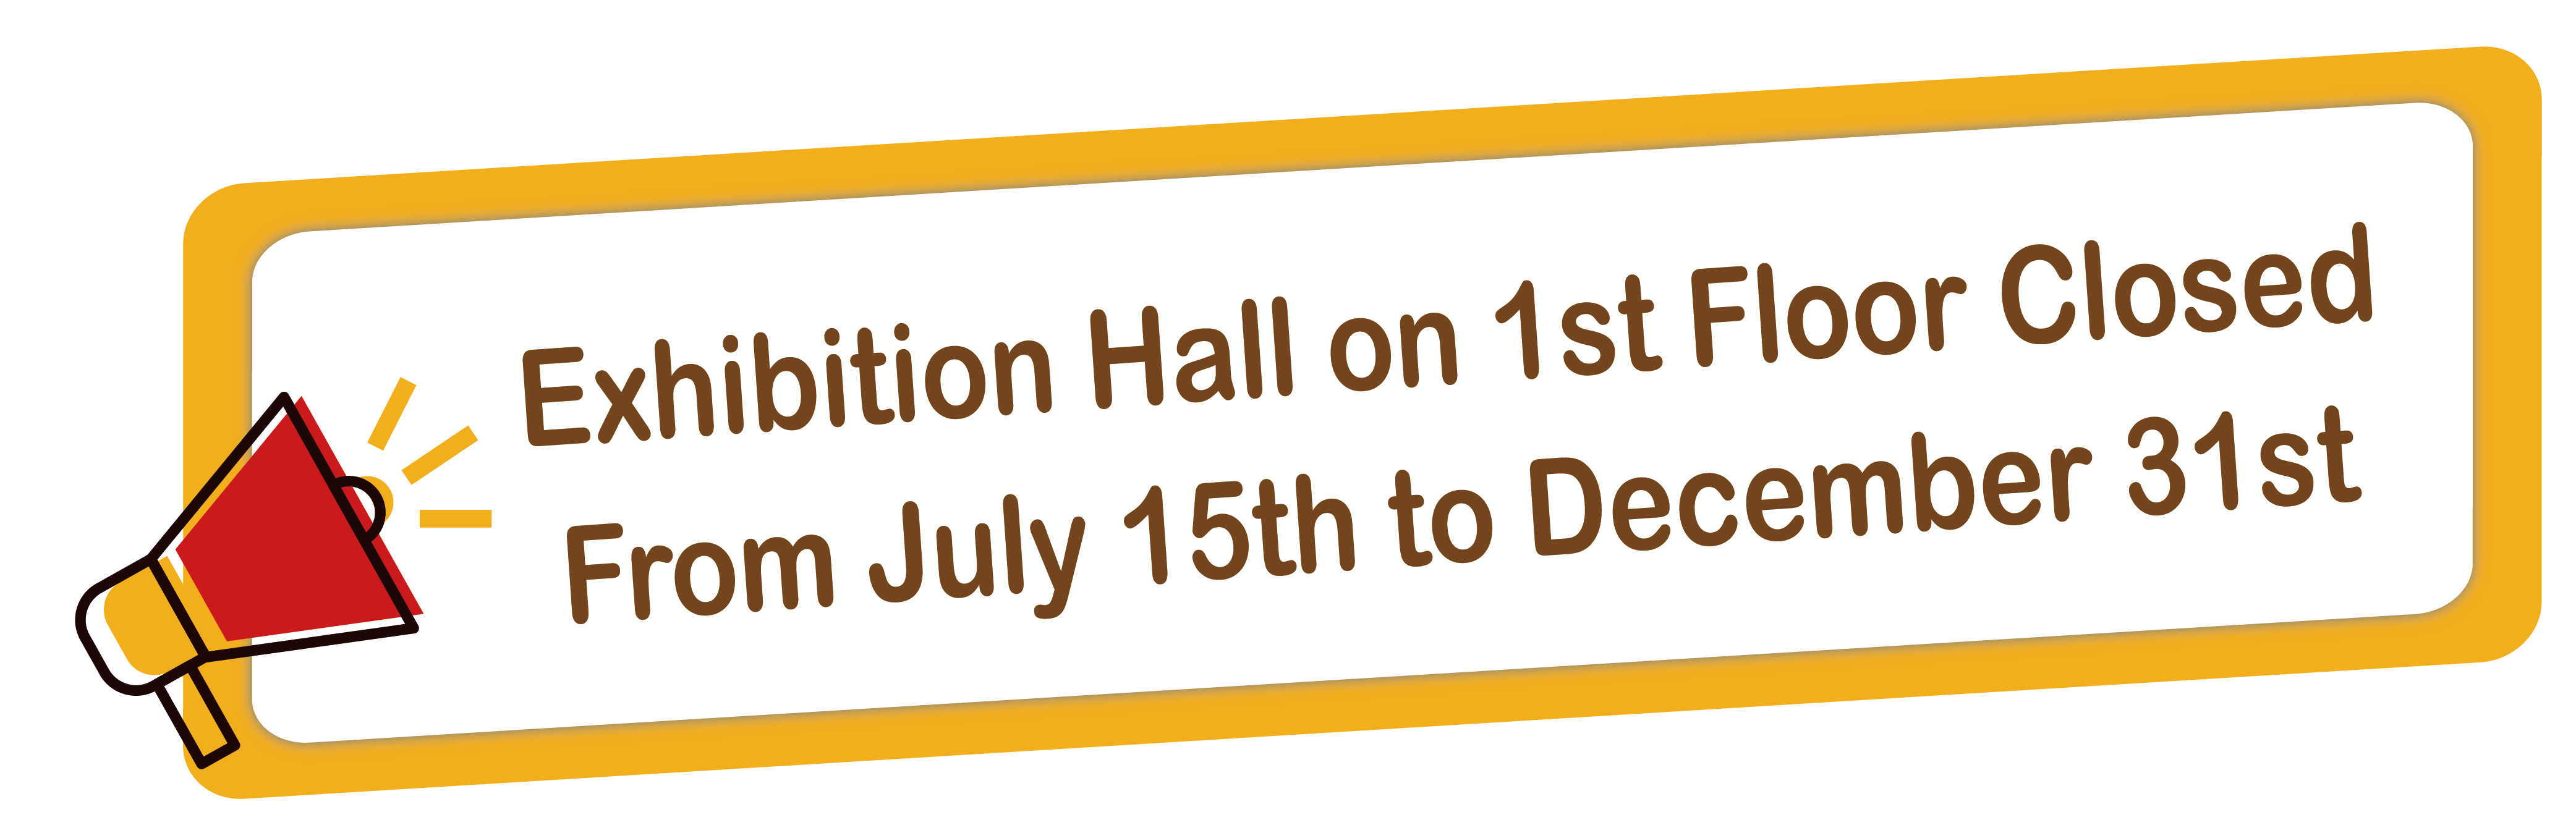 Exhibition Hall on 1st Floor Closed from July 15th